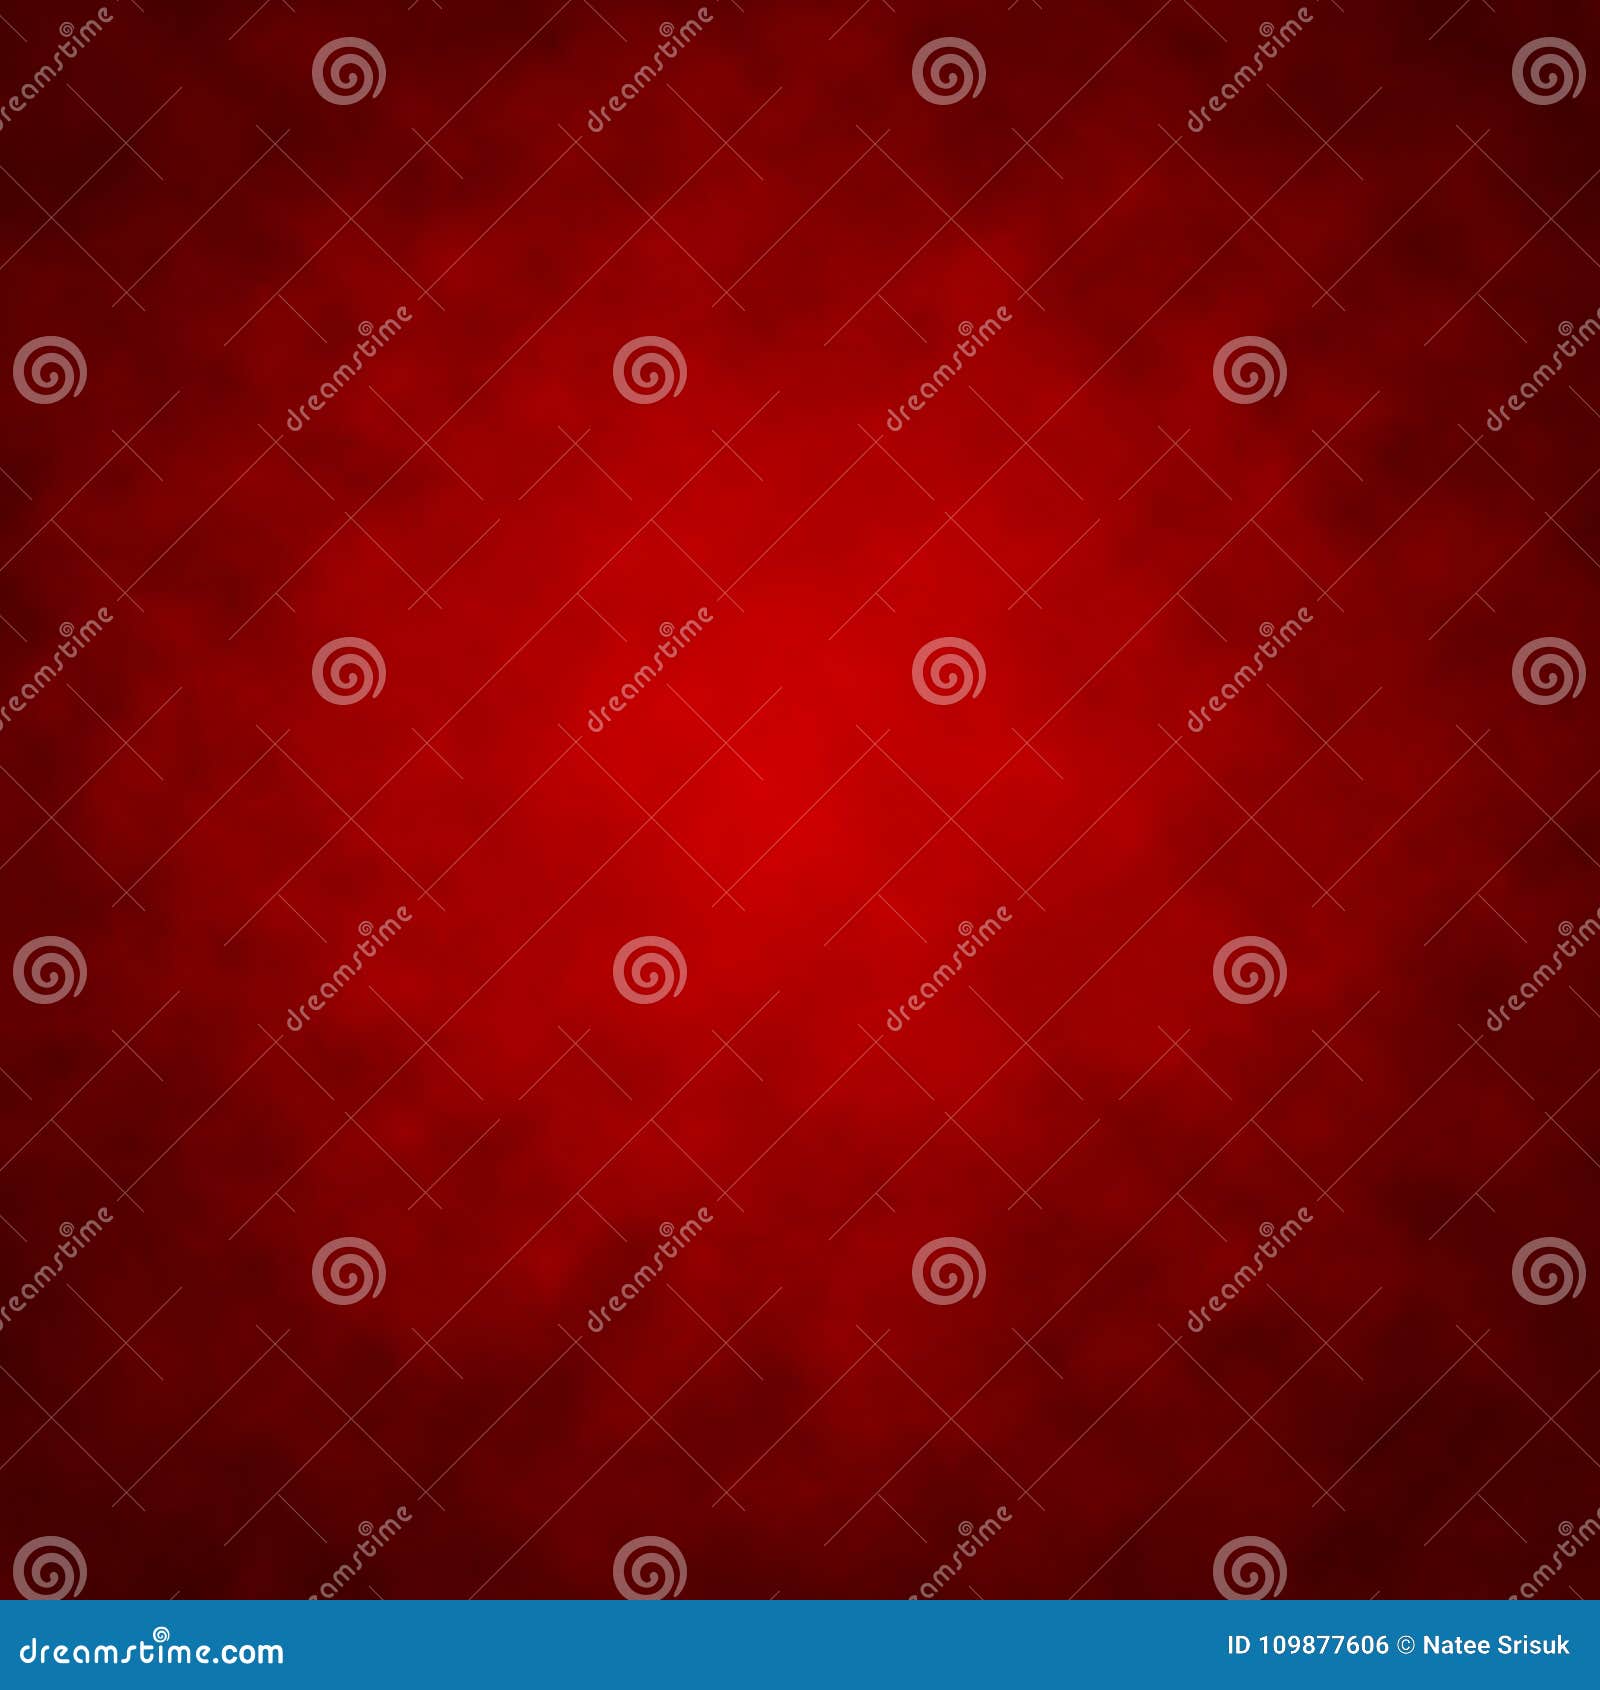 sharp red textured background  Stock image  Colourbox